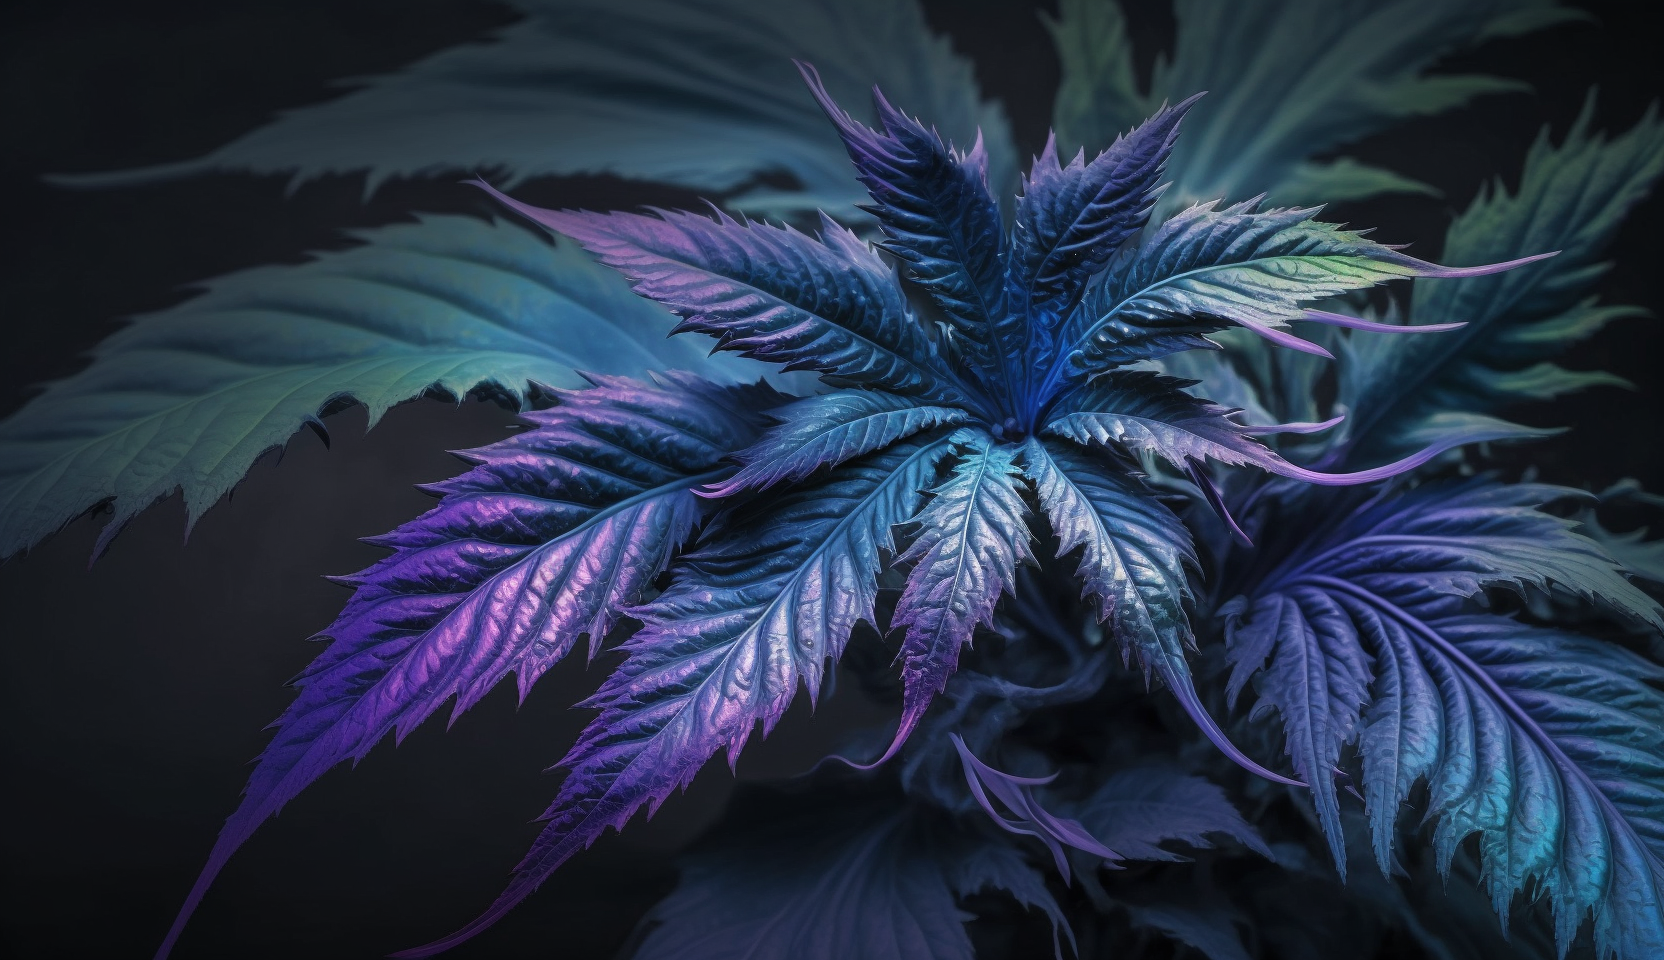 Blue Violet Cannabis: Securing Licensing Approval with Slideckly’s Expert PowerPoint Document Design